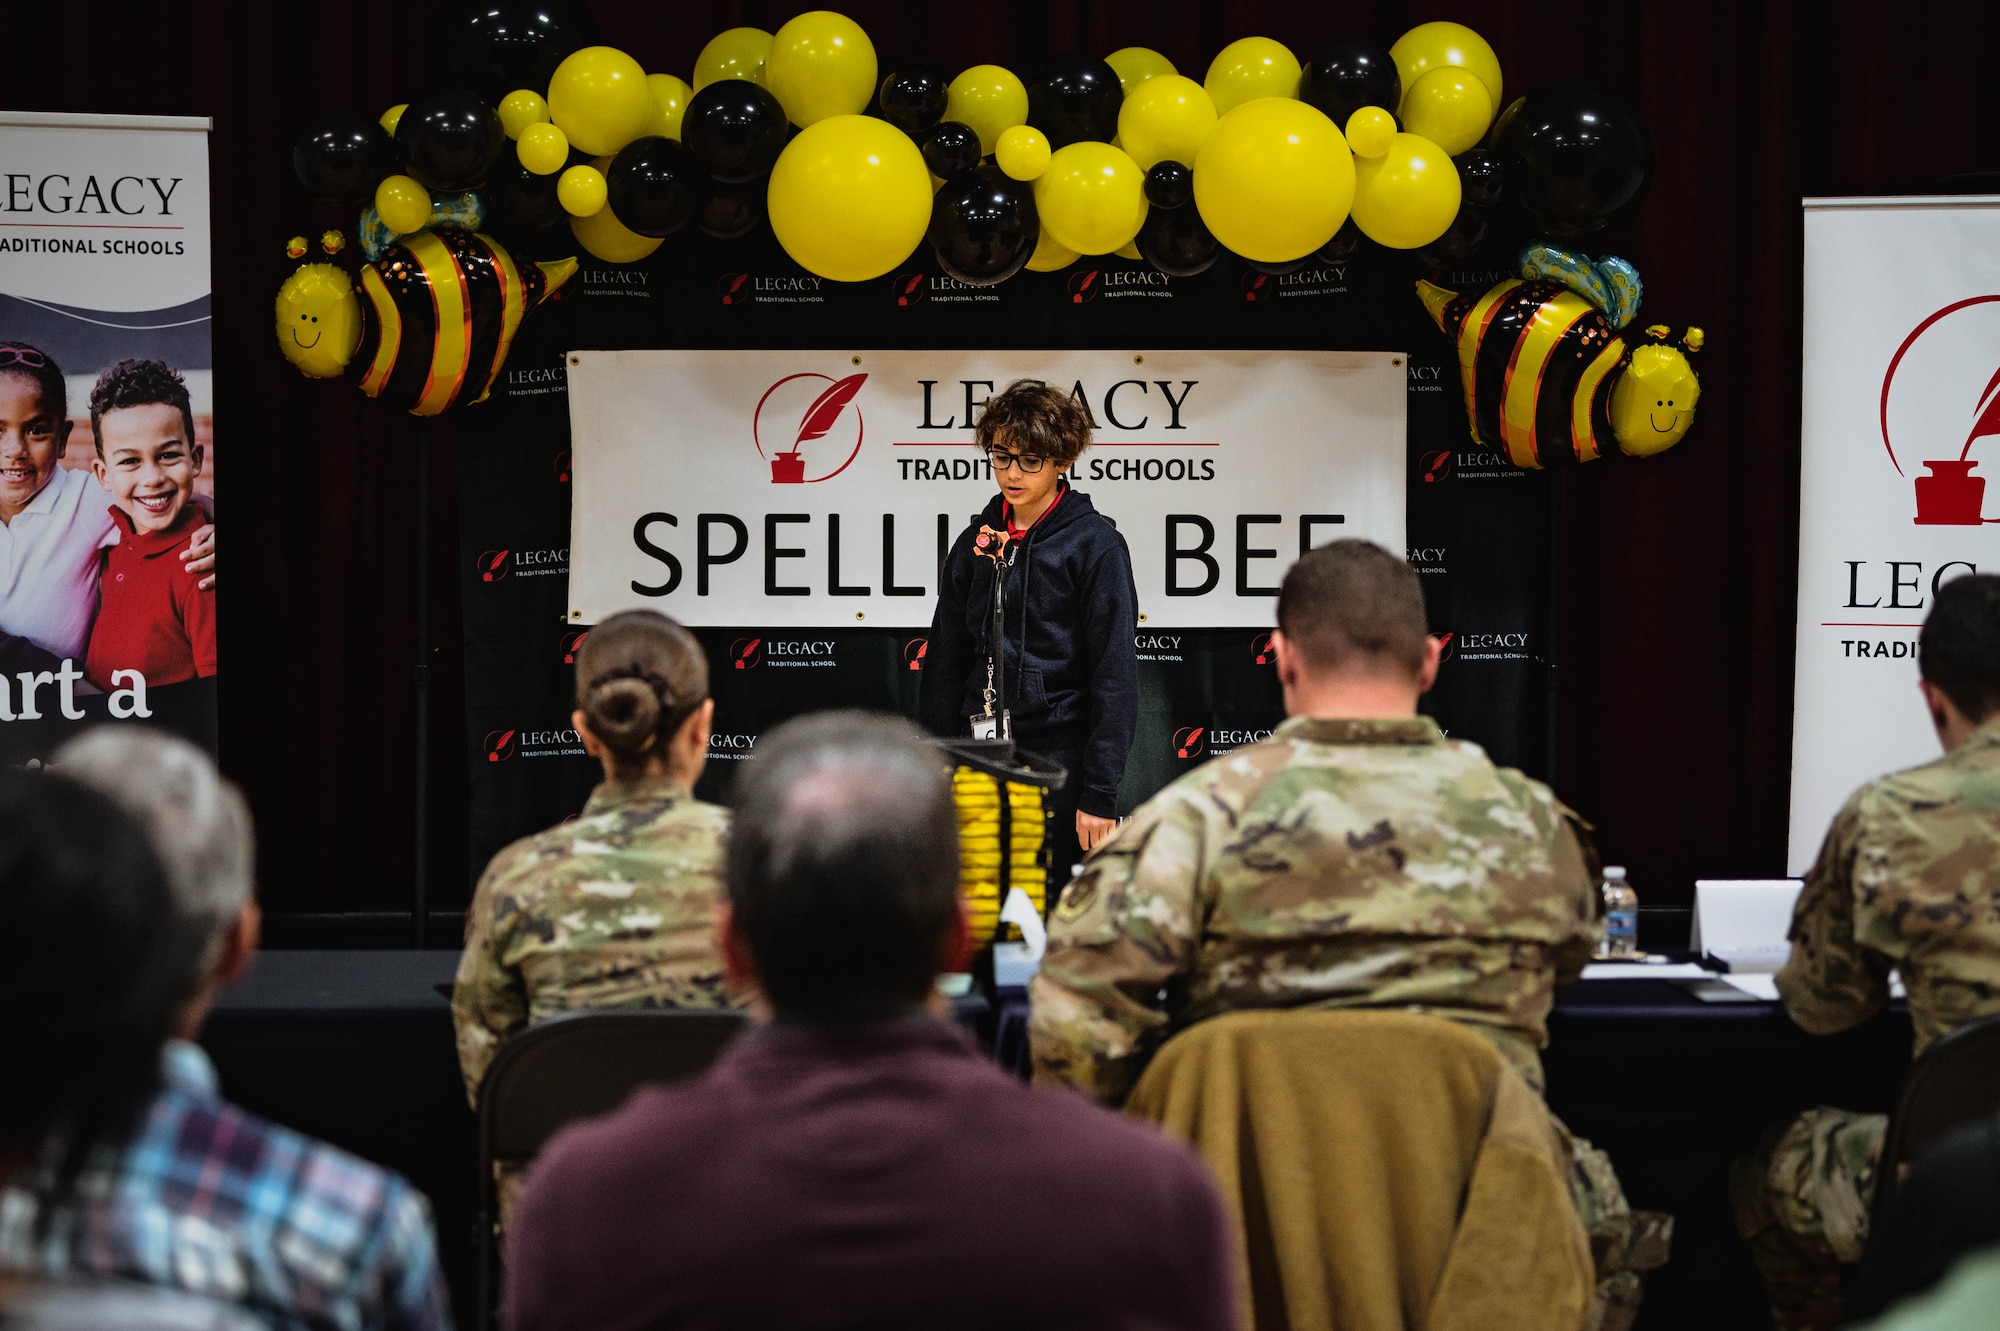 Ben Arlt, Legacy Traditional School student, participates in a spelling bee judged by Luke Air Force Base Airmen.